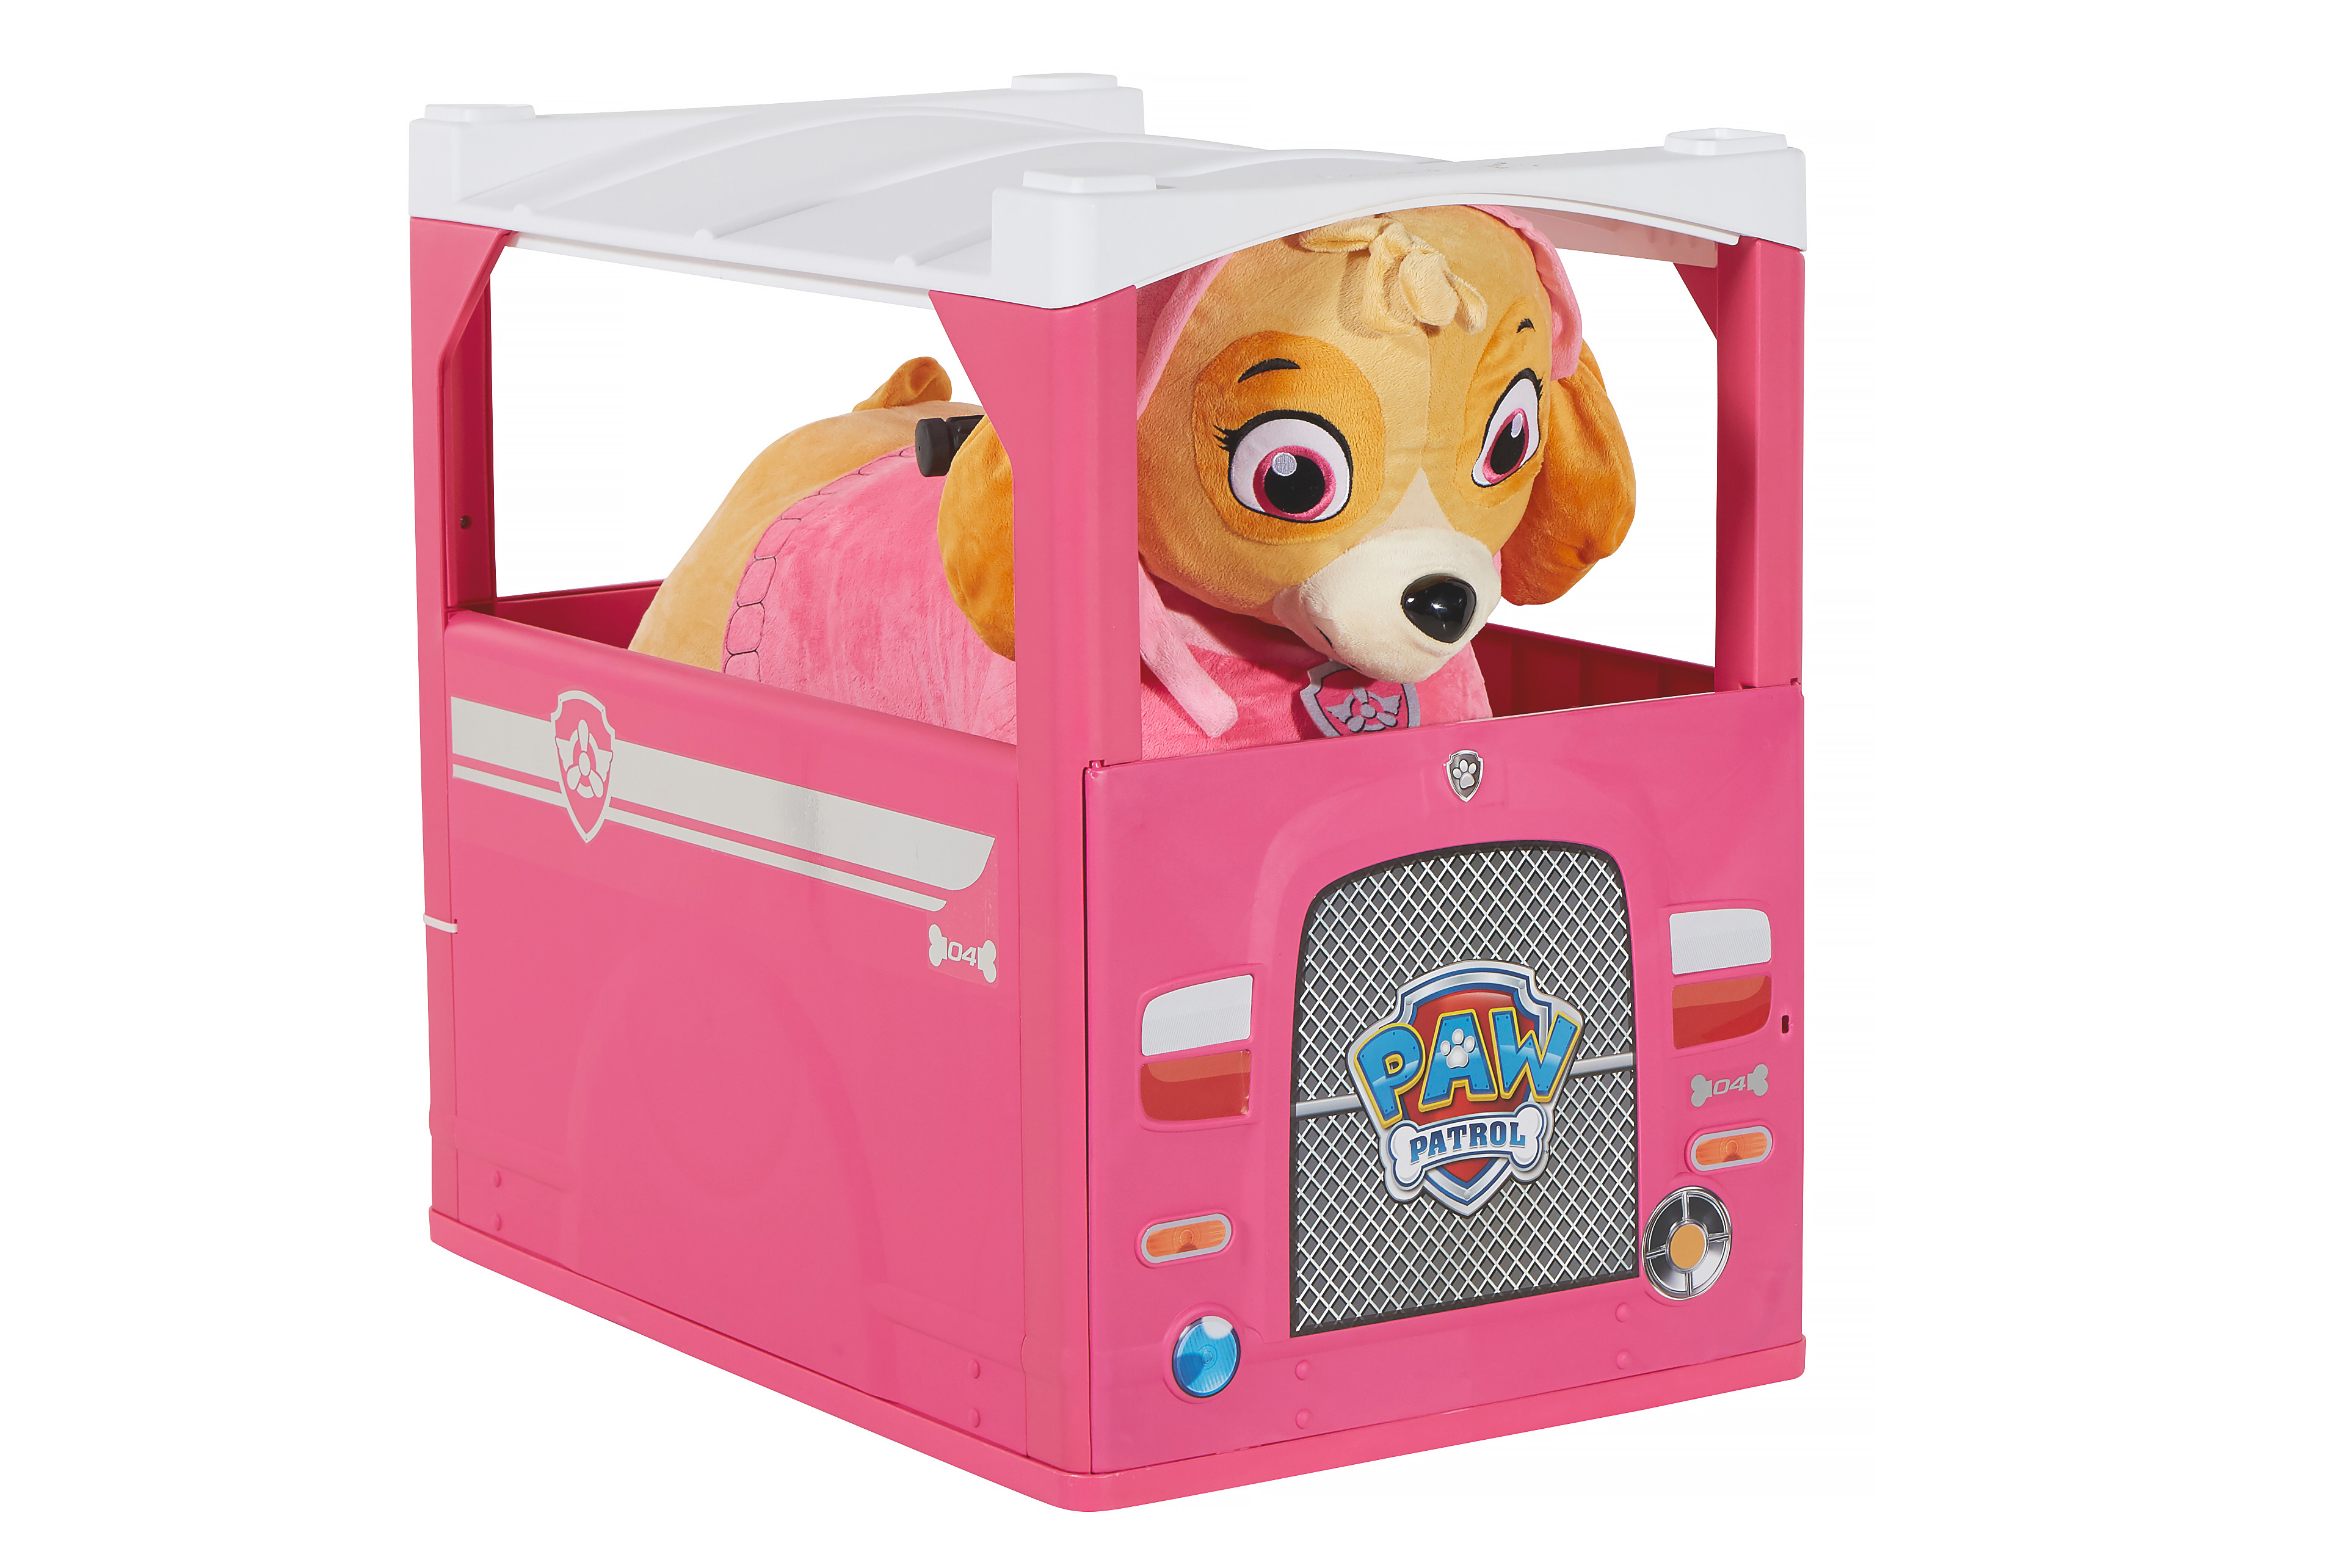 Paw Patrol 6 Volt Plush Skye Ride-on with Pup House Included by Dynacraft! - image 2 of 7